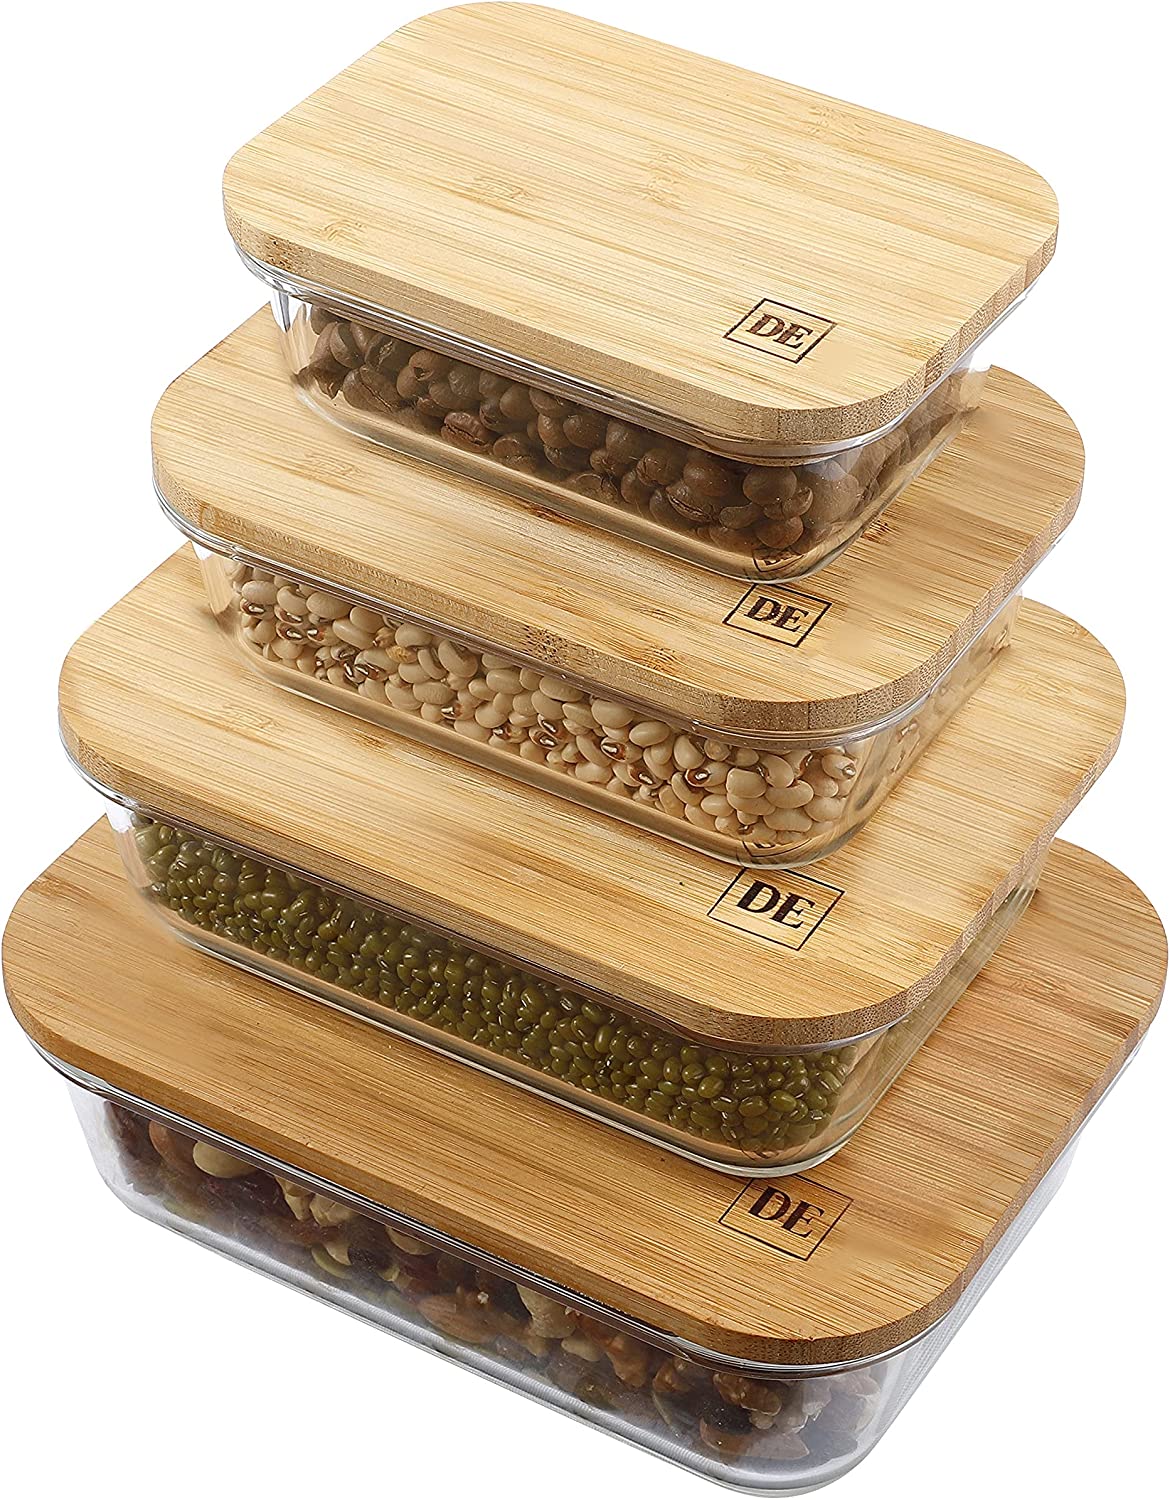 Glass Food Storage Containers with Lids (Bamboo) - 4 Piece Value Set - The  Most Ecofriendly Glass Containers for Food Storage with Lids - Airtight